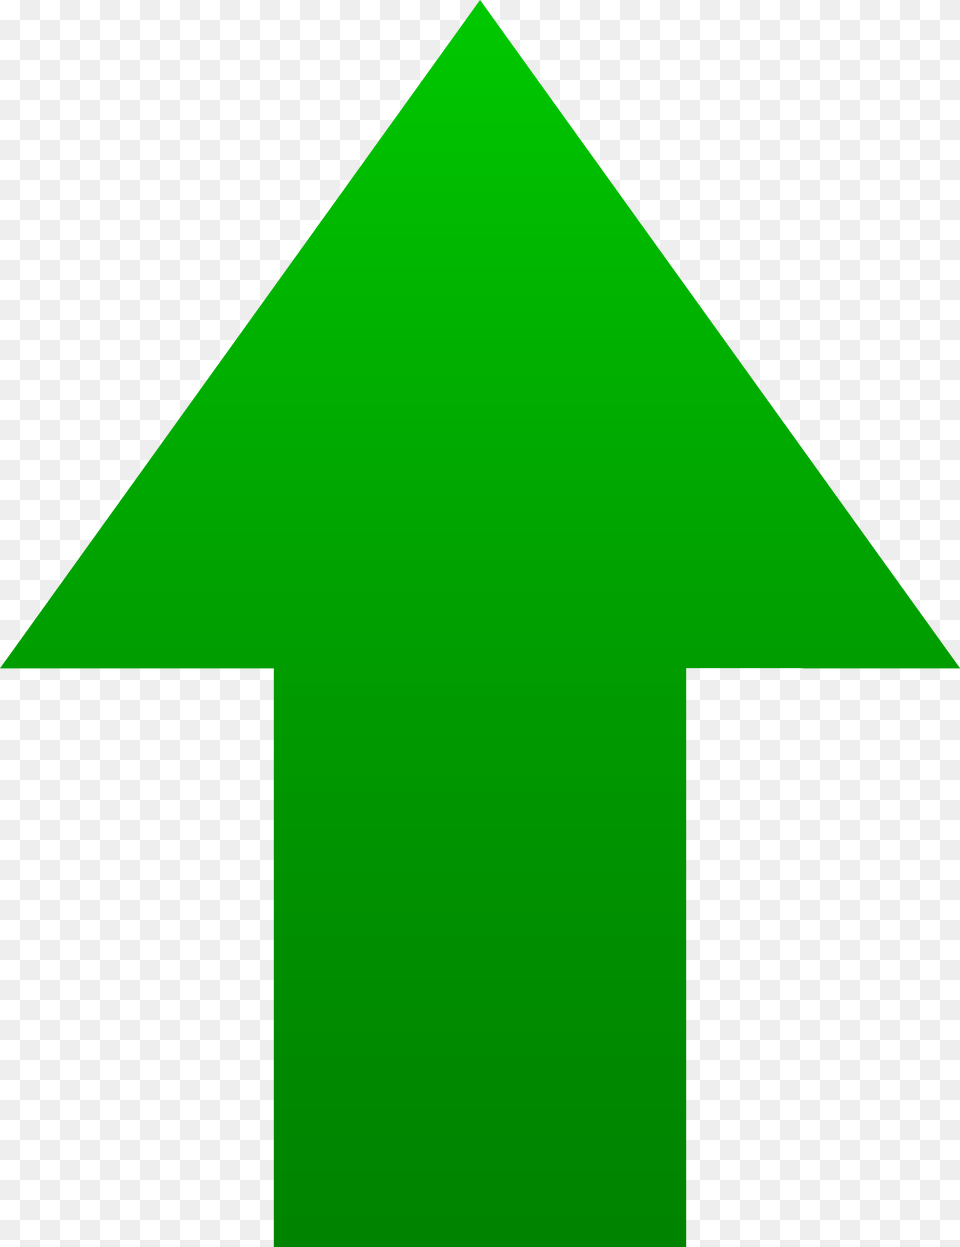 Download Green Arrow Pic For Green Arrow Icon, Triangle, Symbol Free Transparent Png